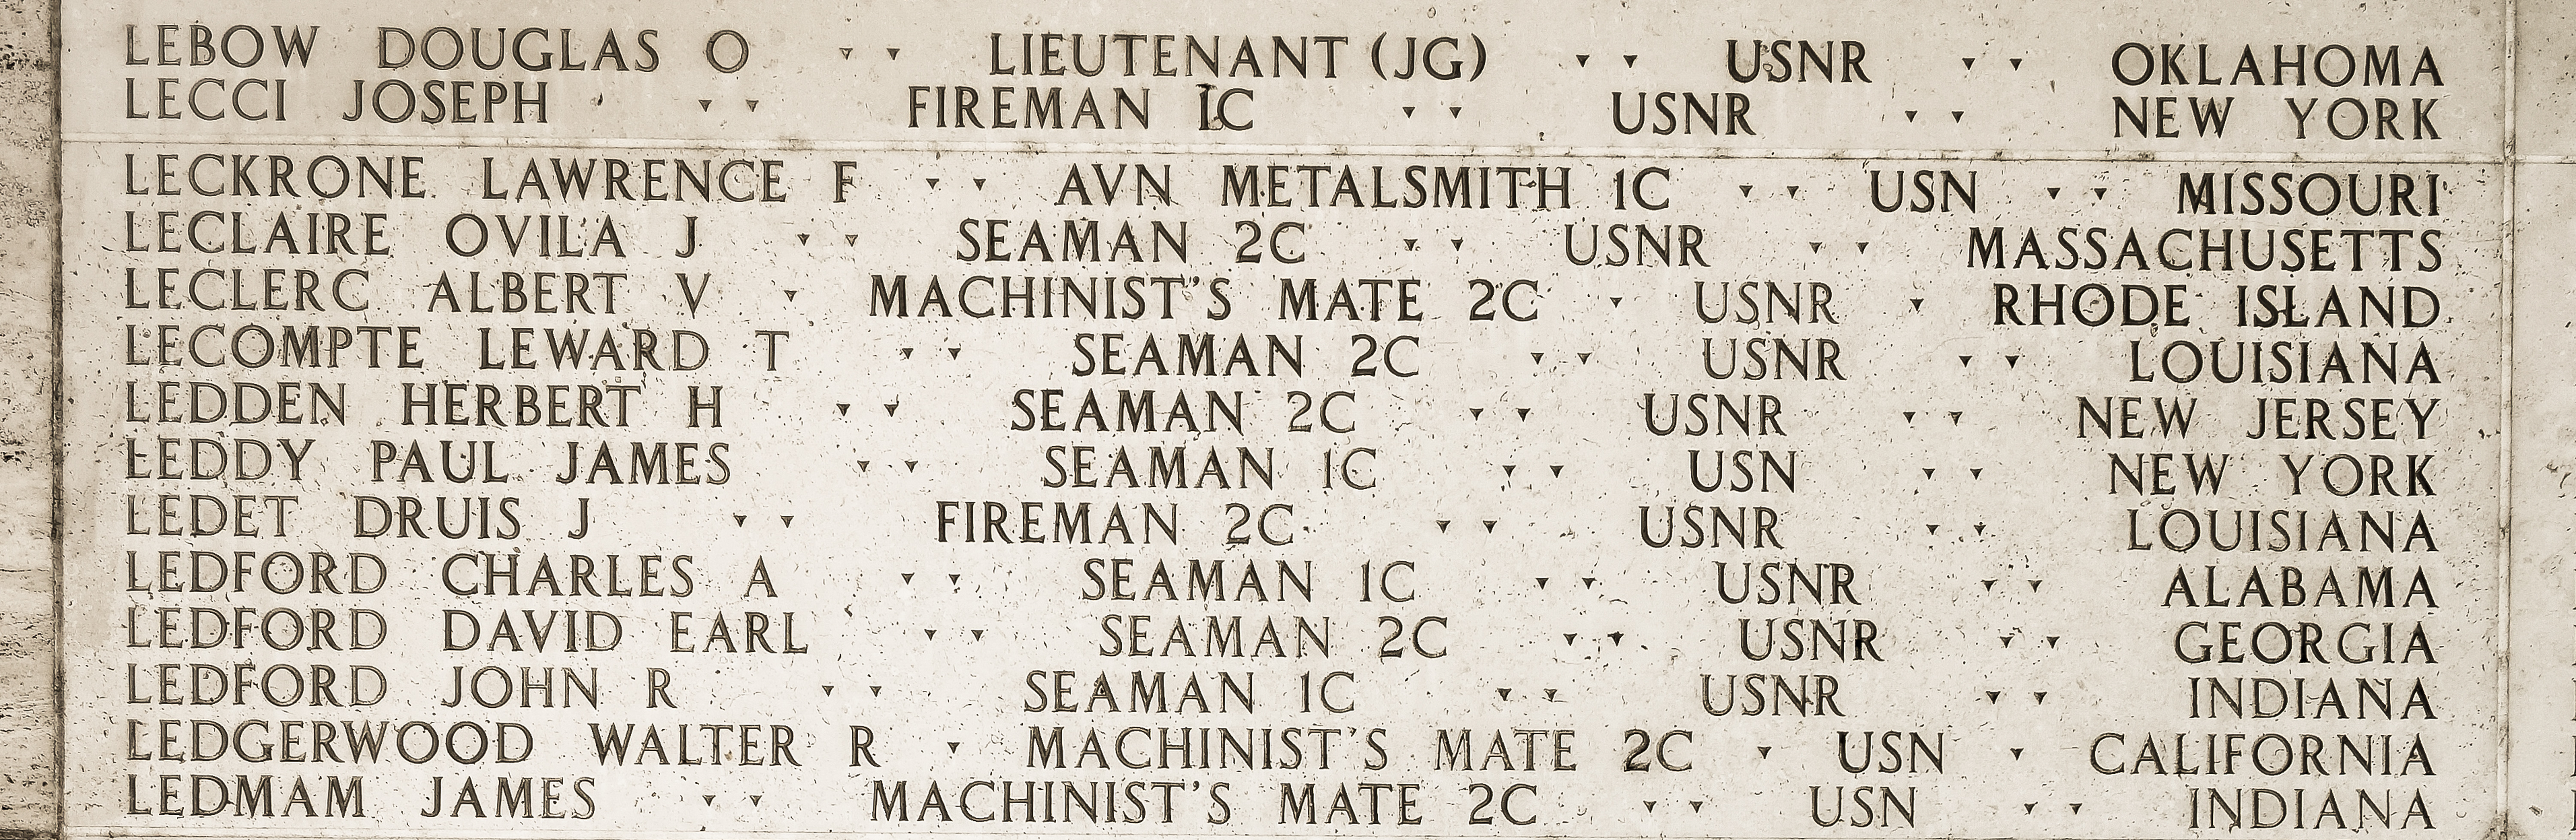 Lawrence F. Leckrone, Aviation Metalsmith First Class